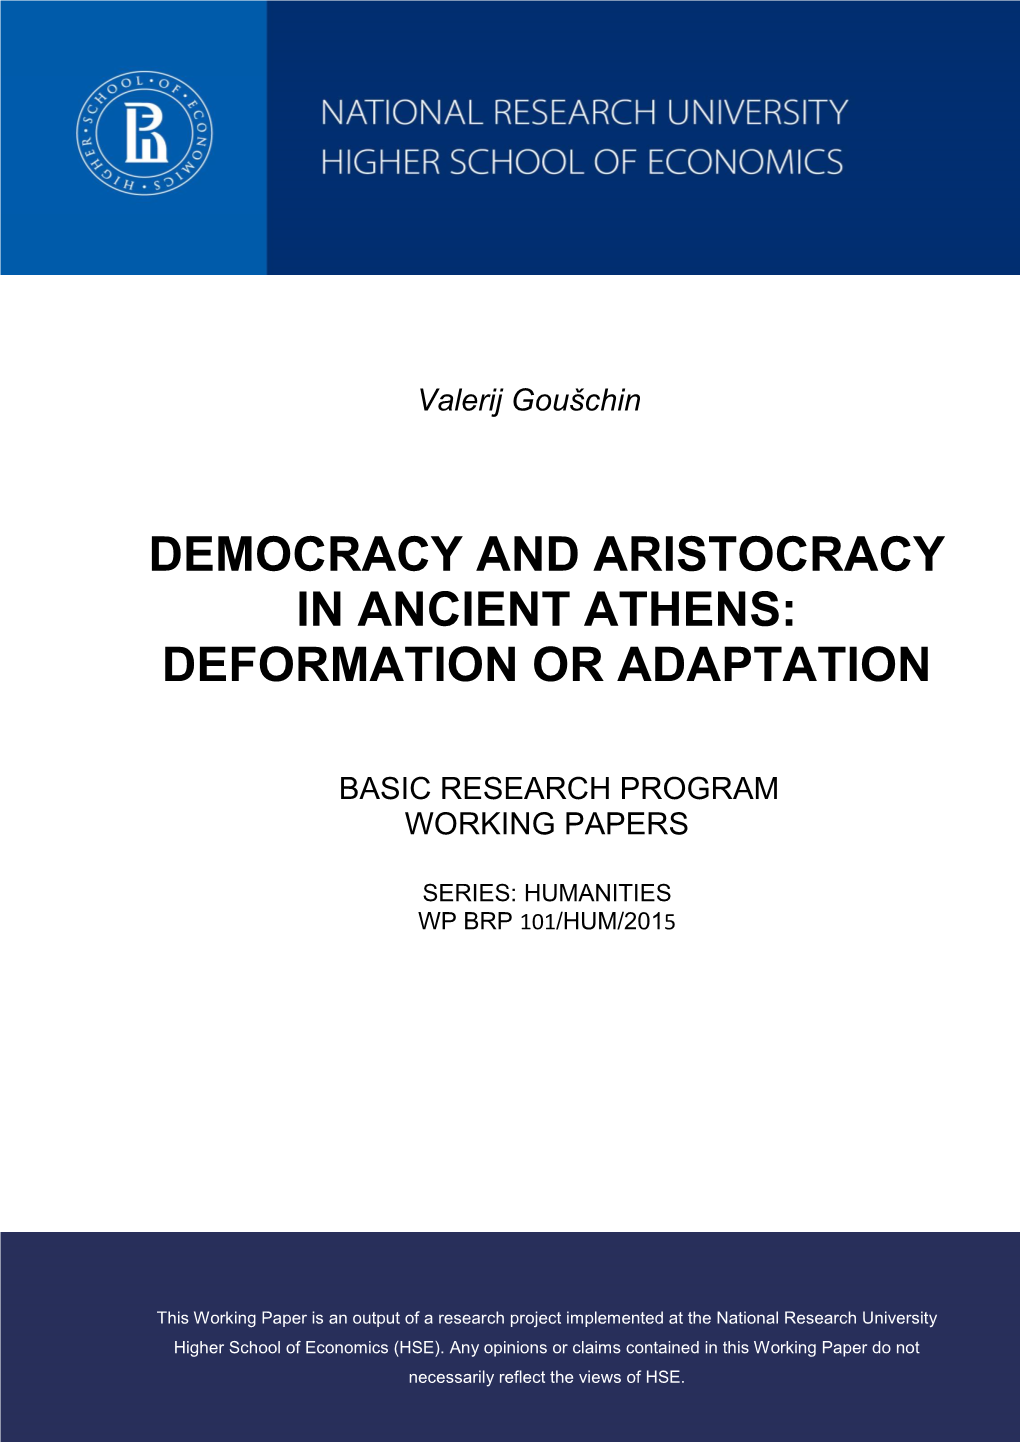 Democracy and Aristocracy in Ancient Athens: Deformation Or Adaptation